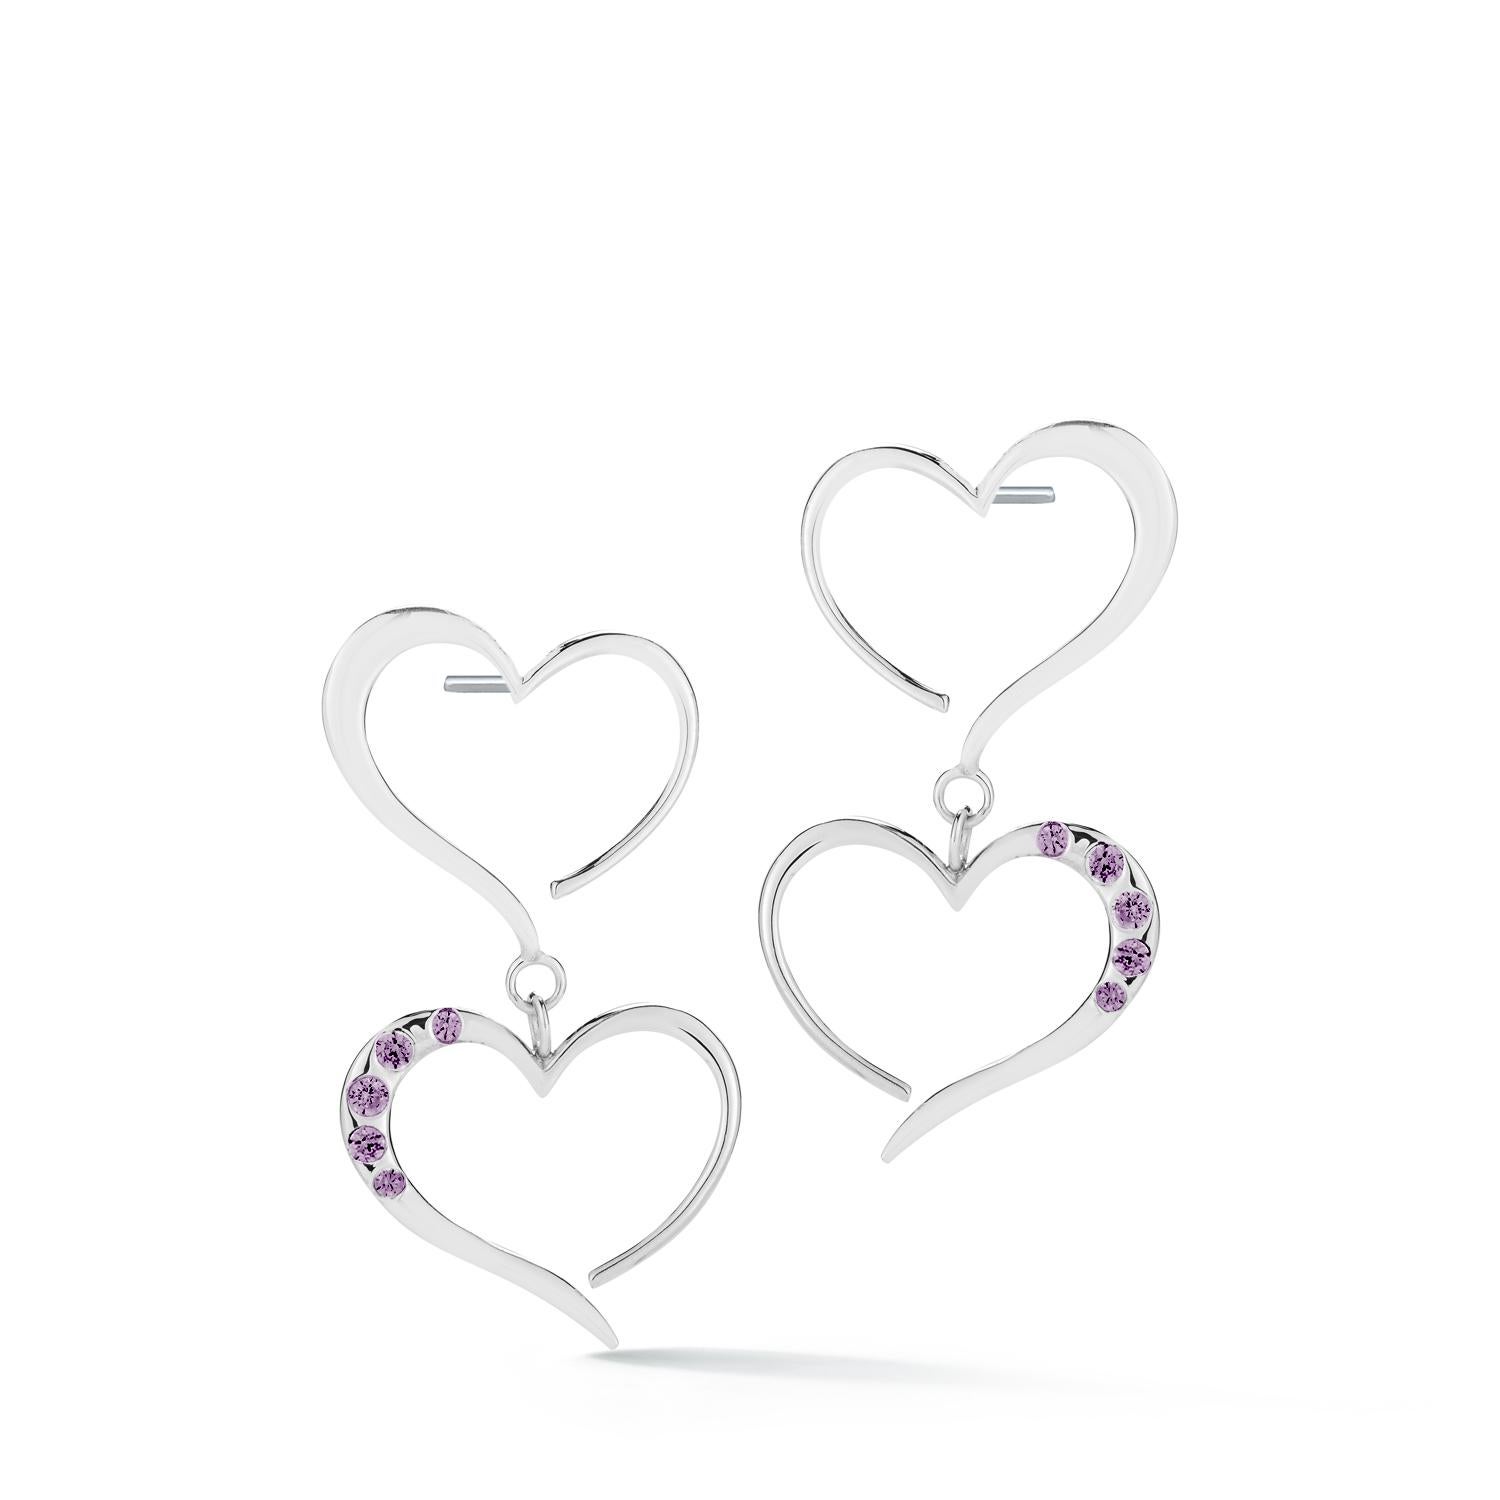 Designed in NYC

.925 Sterling Silver White Topaz Double Heart Pave Dangle Earrings. On the road to charting your own path, the only rule is to follow your heart. Double heart pave dangle earrings:

Sterling silver 
High-polish finish
Light-weight